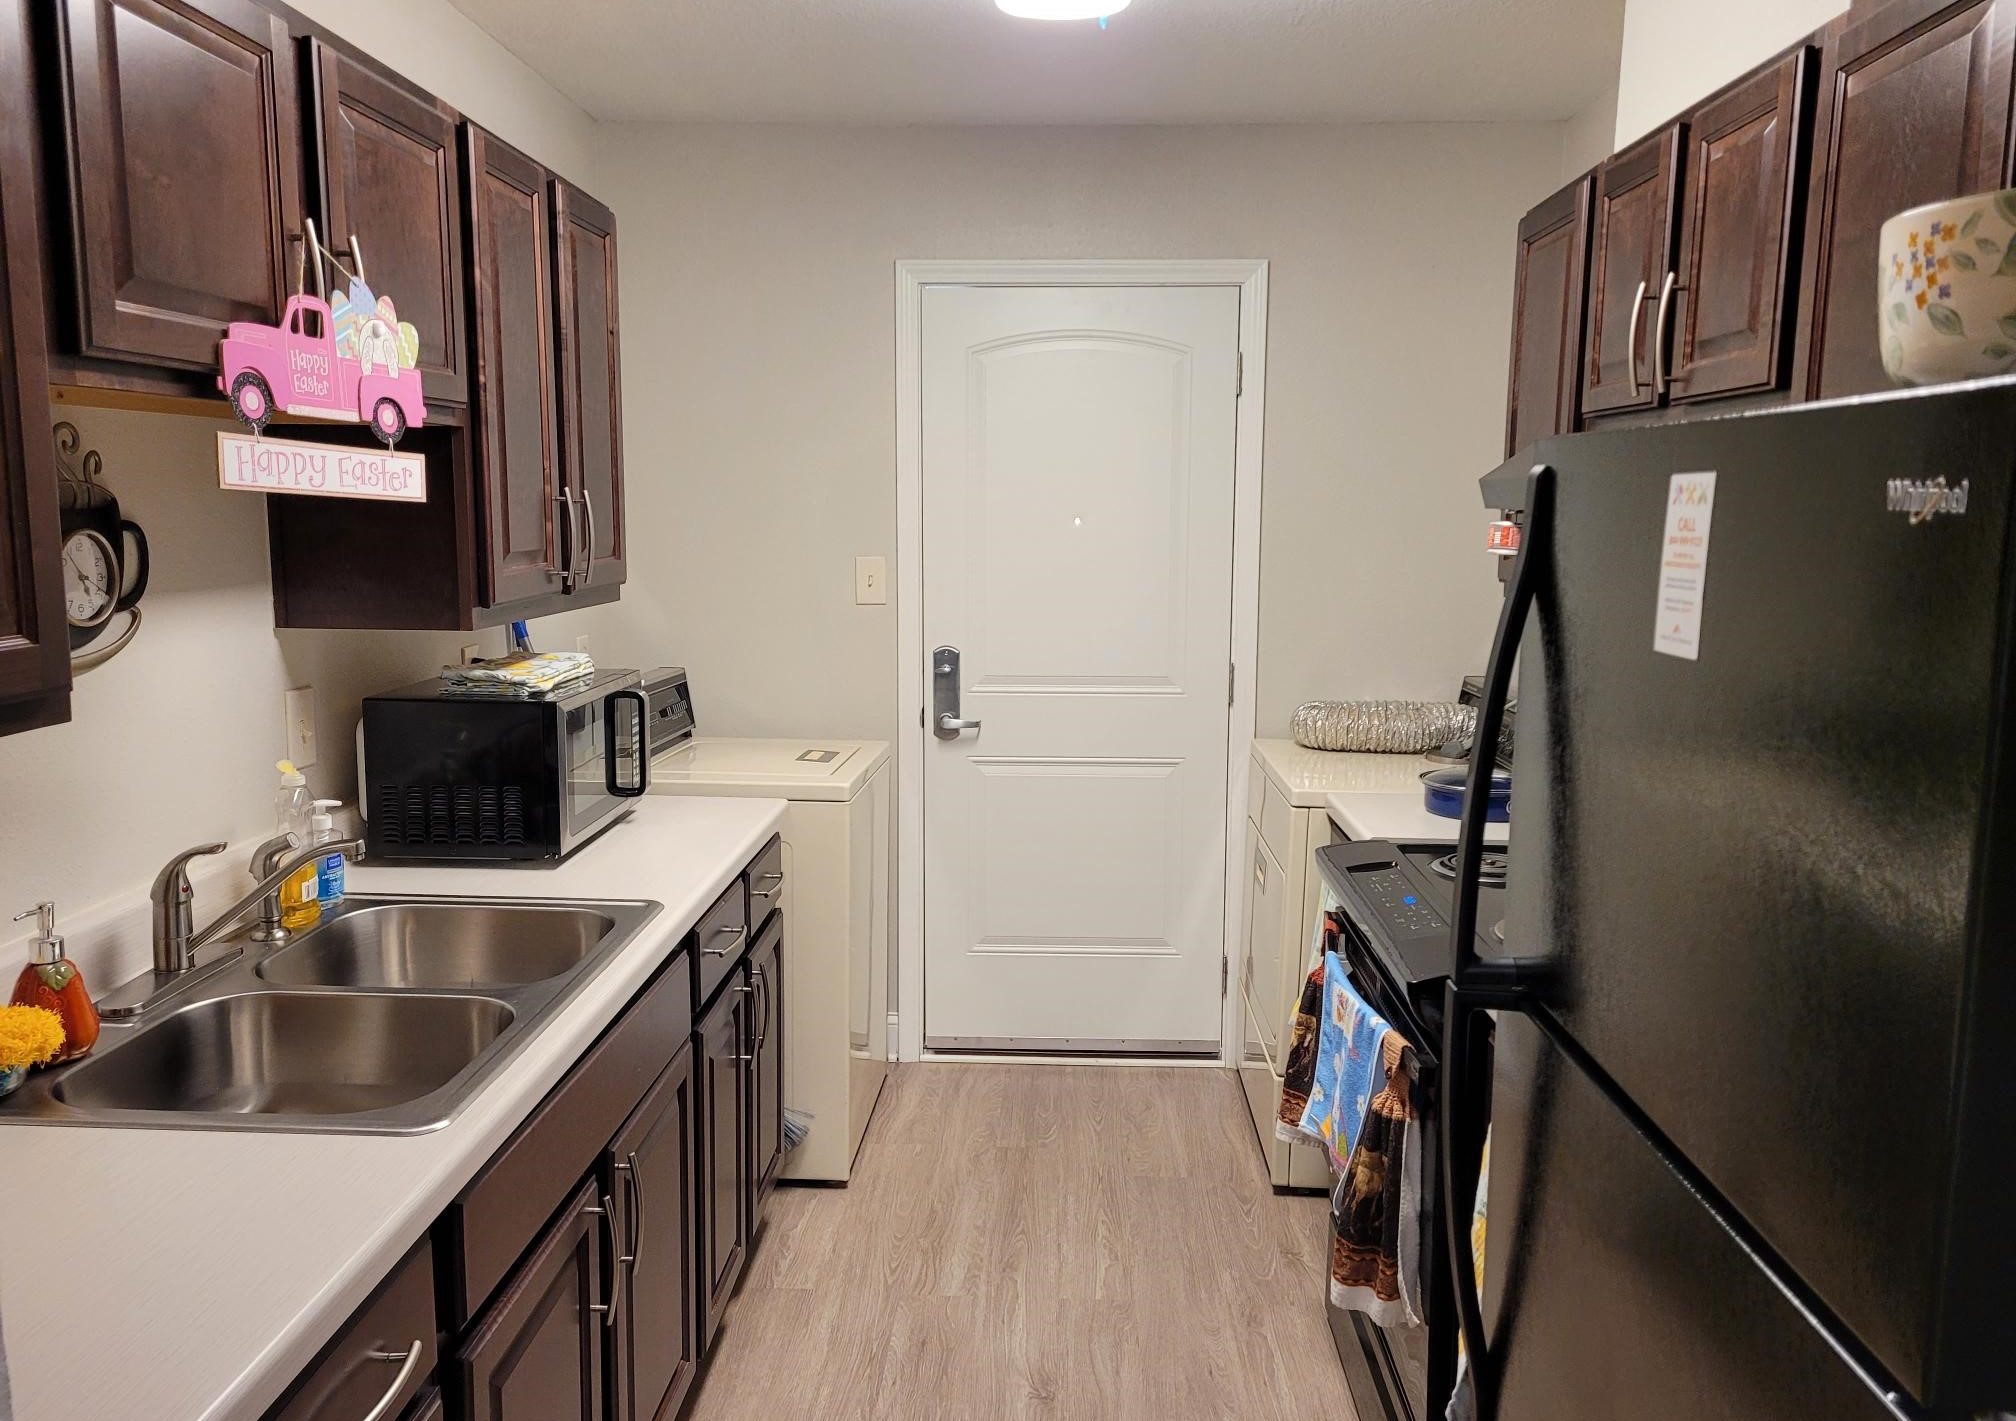 The kitchen in a Mid-Tule Village independent living home